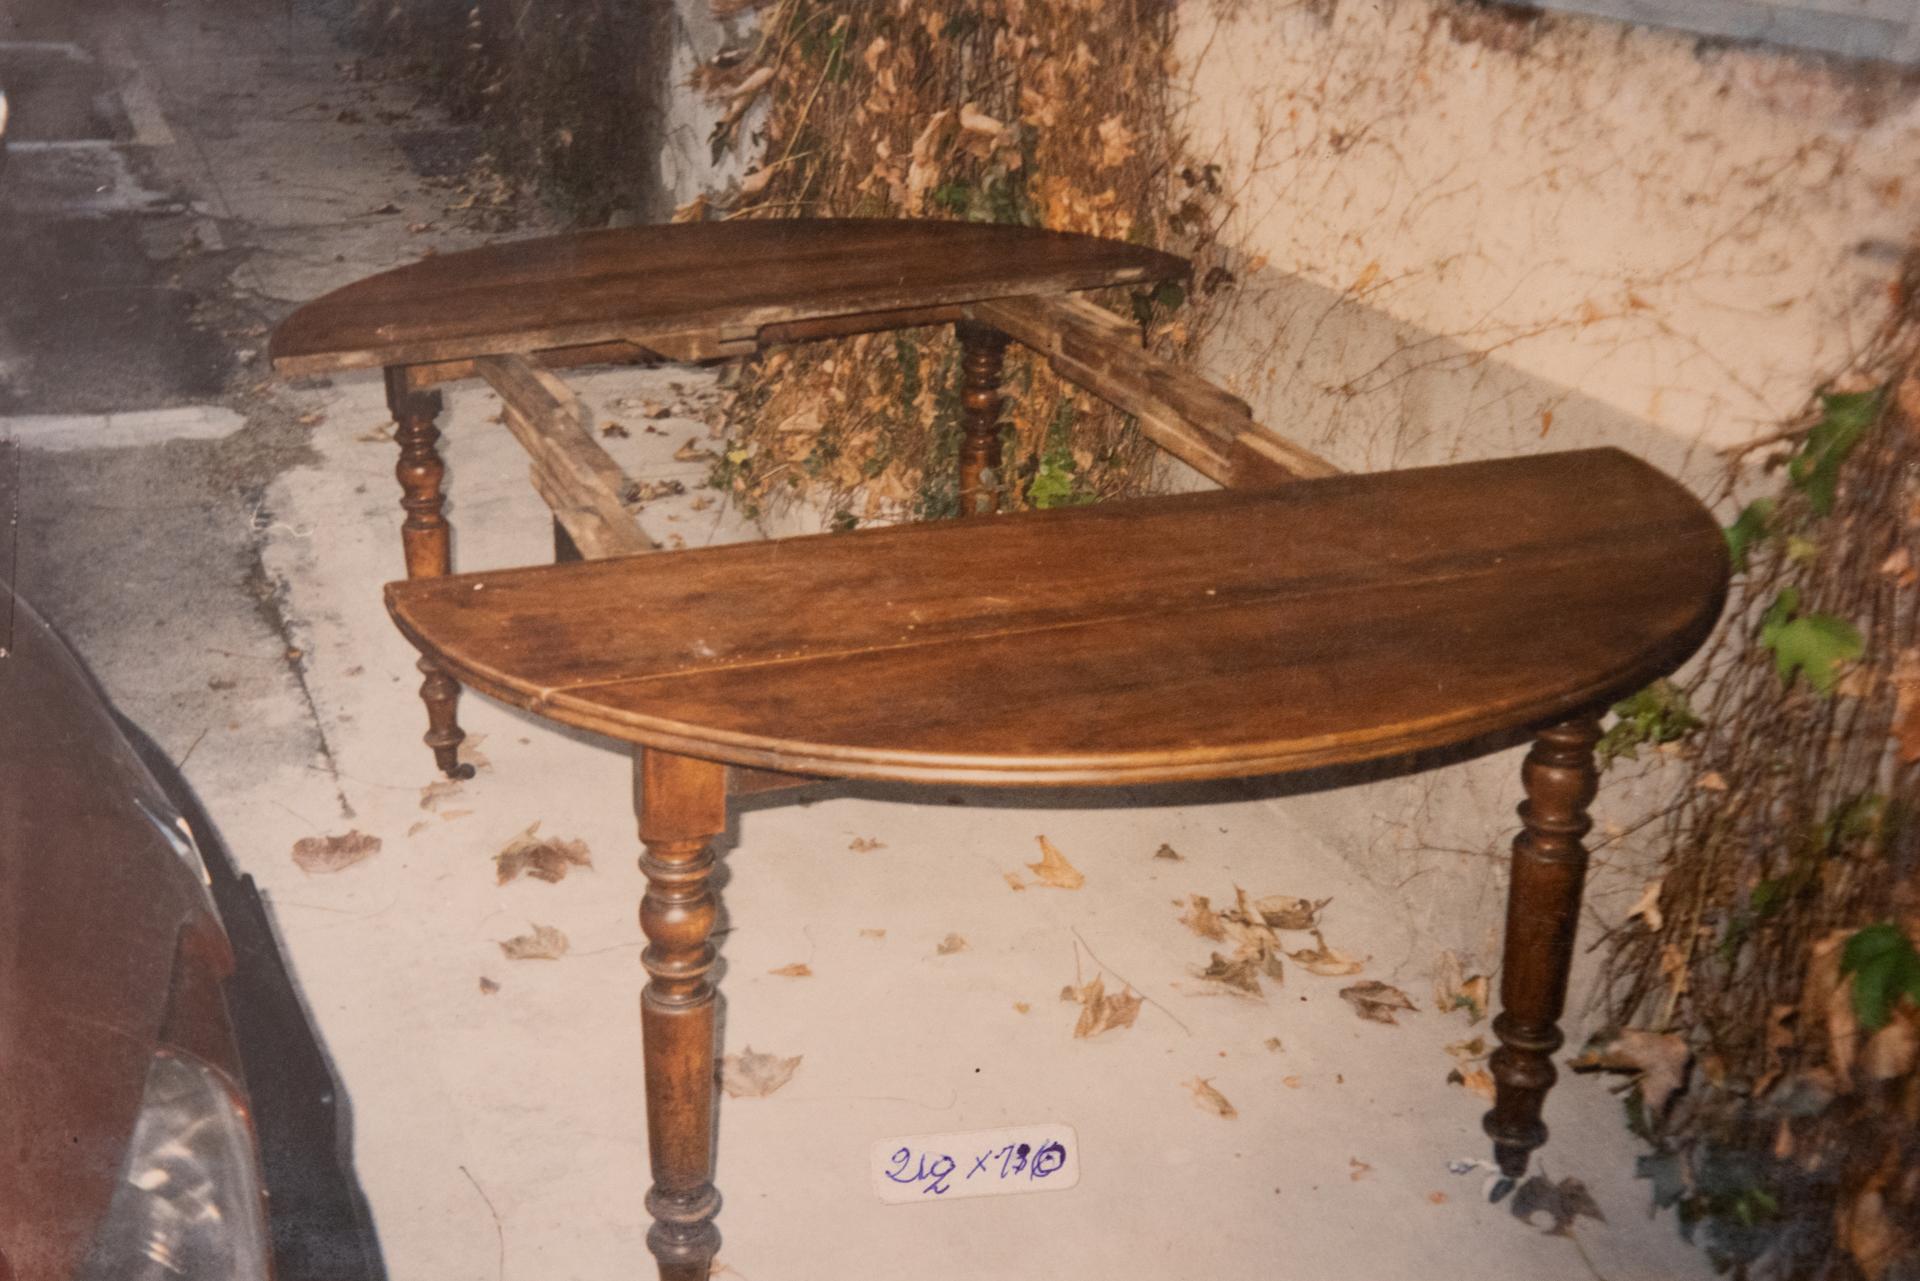 M/1329 - Antique oval extendable table with wheels. It can be used in many ways:
closed as console;  open on one side if there is little space and You don't need all open.  
When it's closed on both sides: cm 130 x63.  Open on one side: cm. 130x